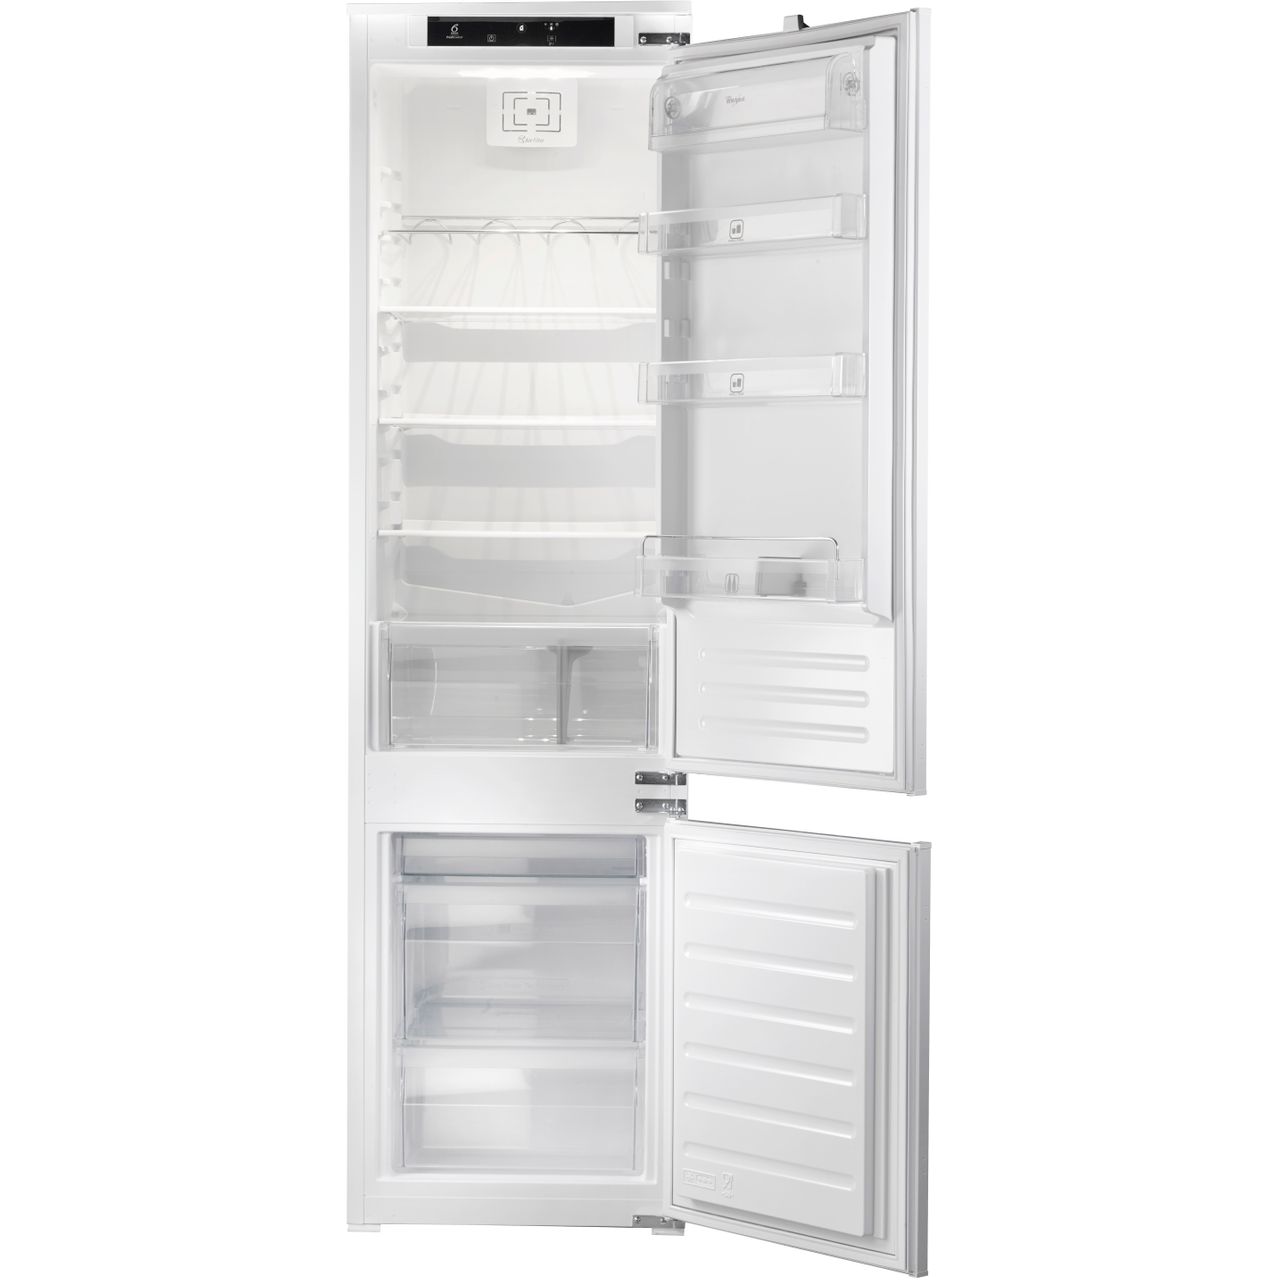 Whirlpool ART228/80A+/SF.1 Integrated 70/30 Fridge Freezer with Sliding Door Fixing Kit Review